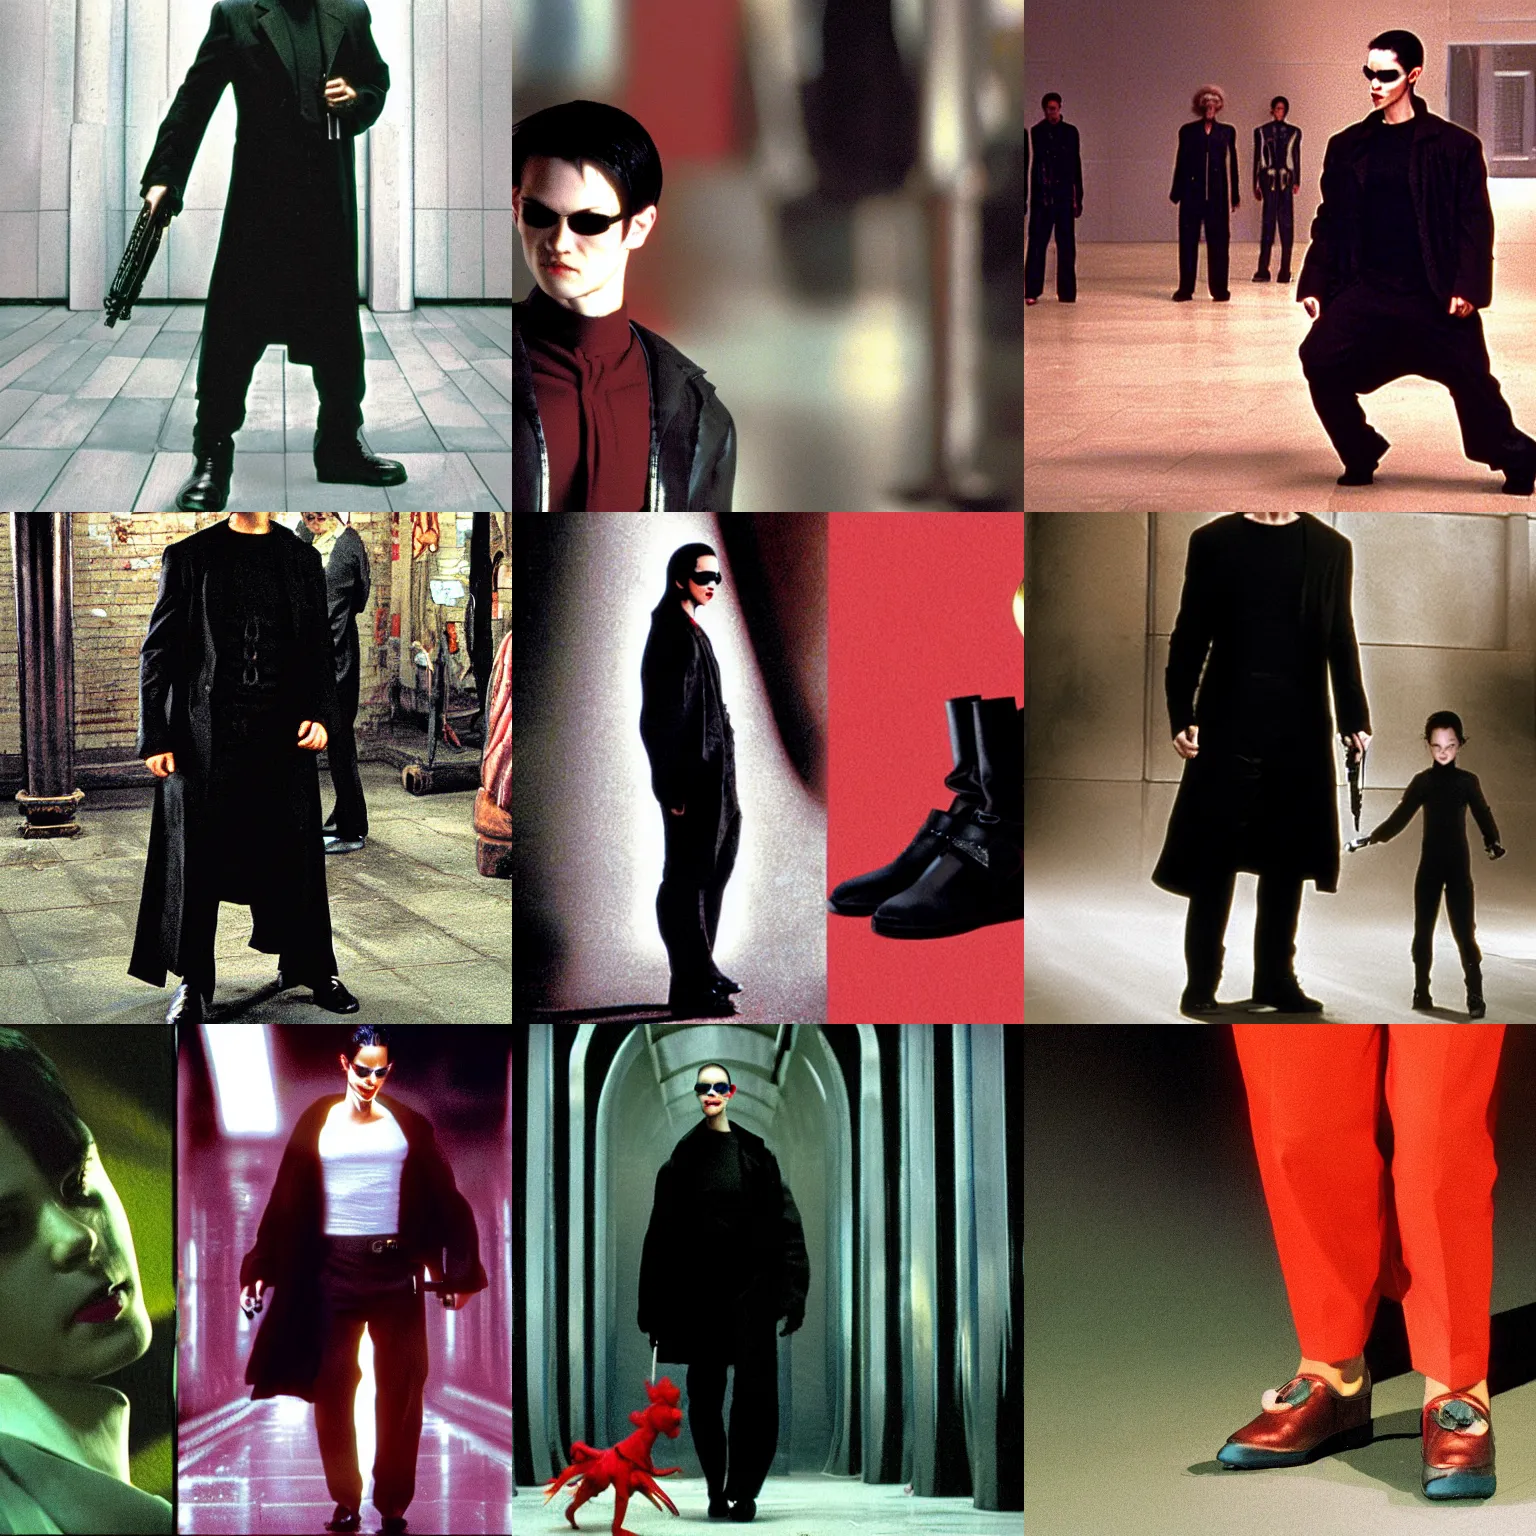 Prompt: neo from the matrix wearing clown shoes